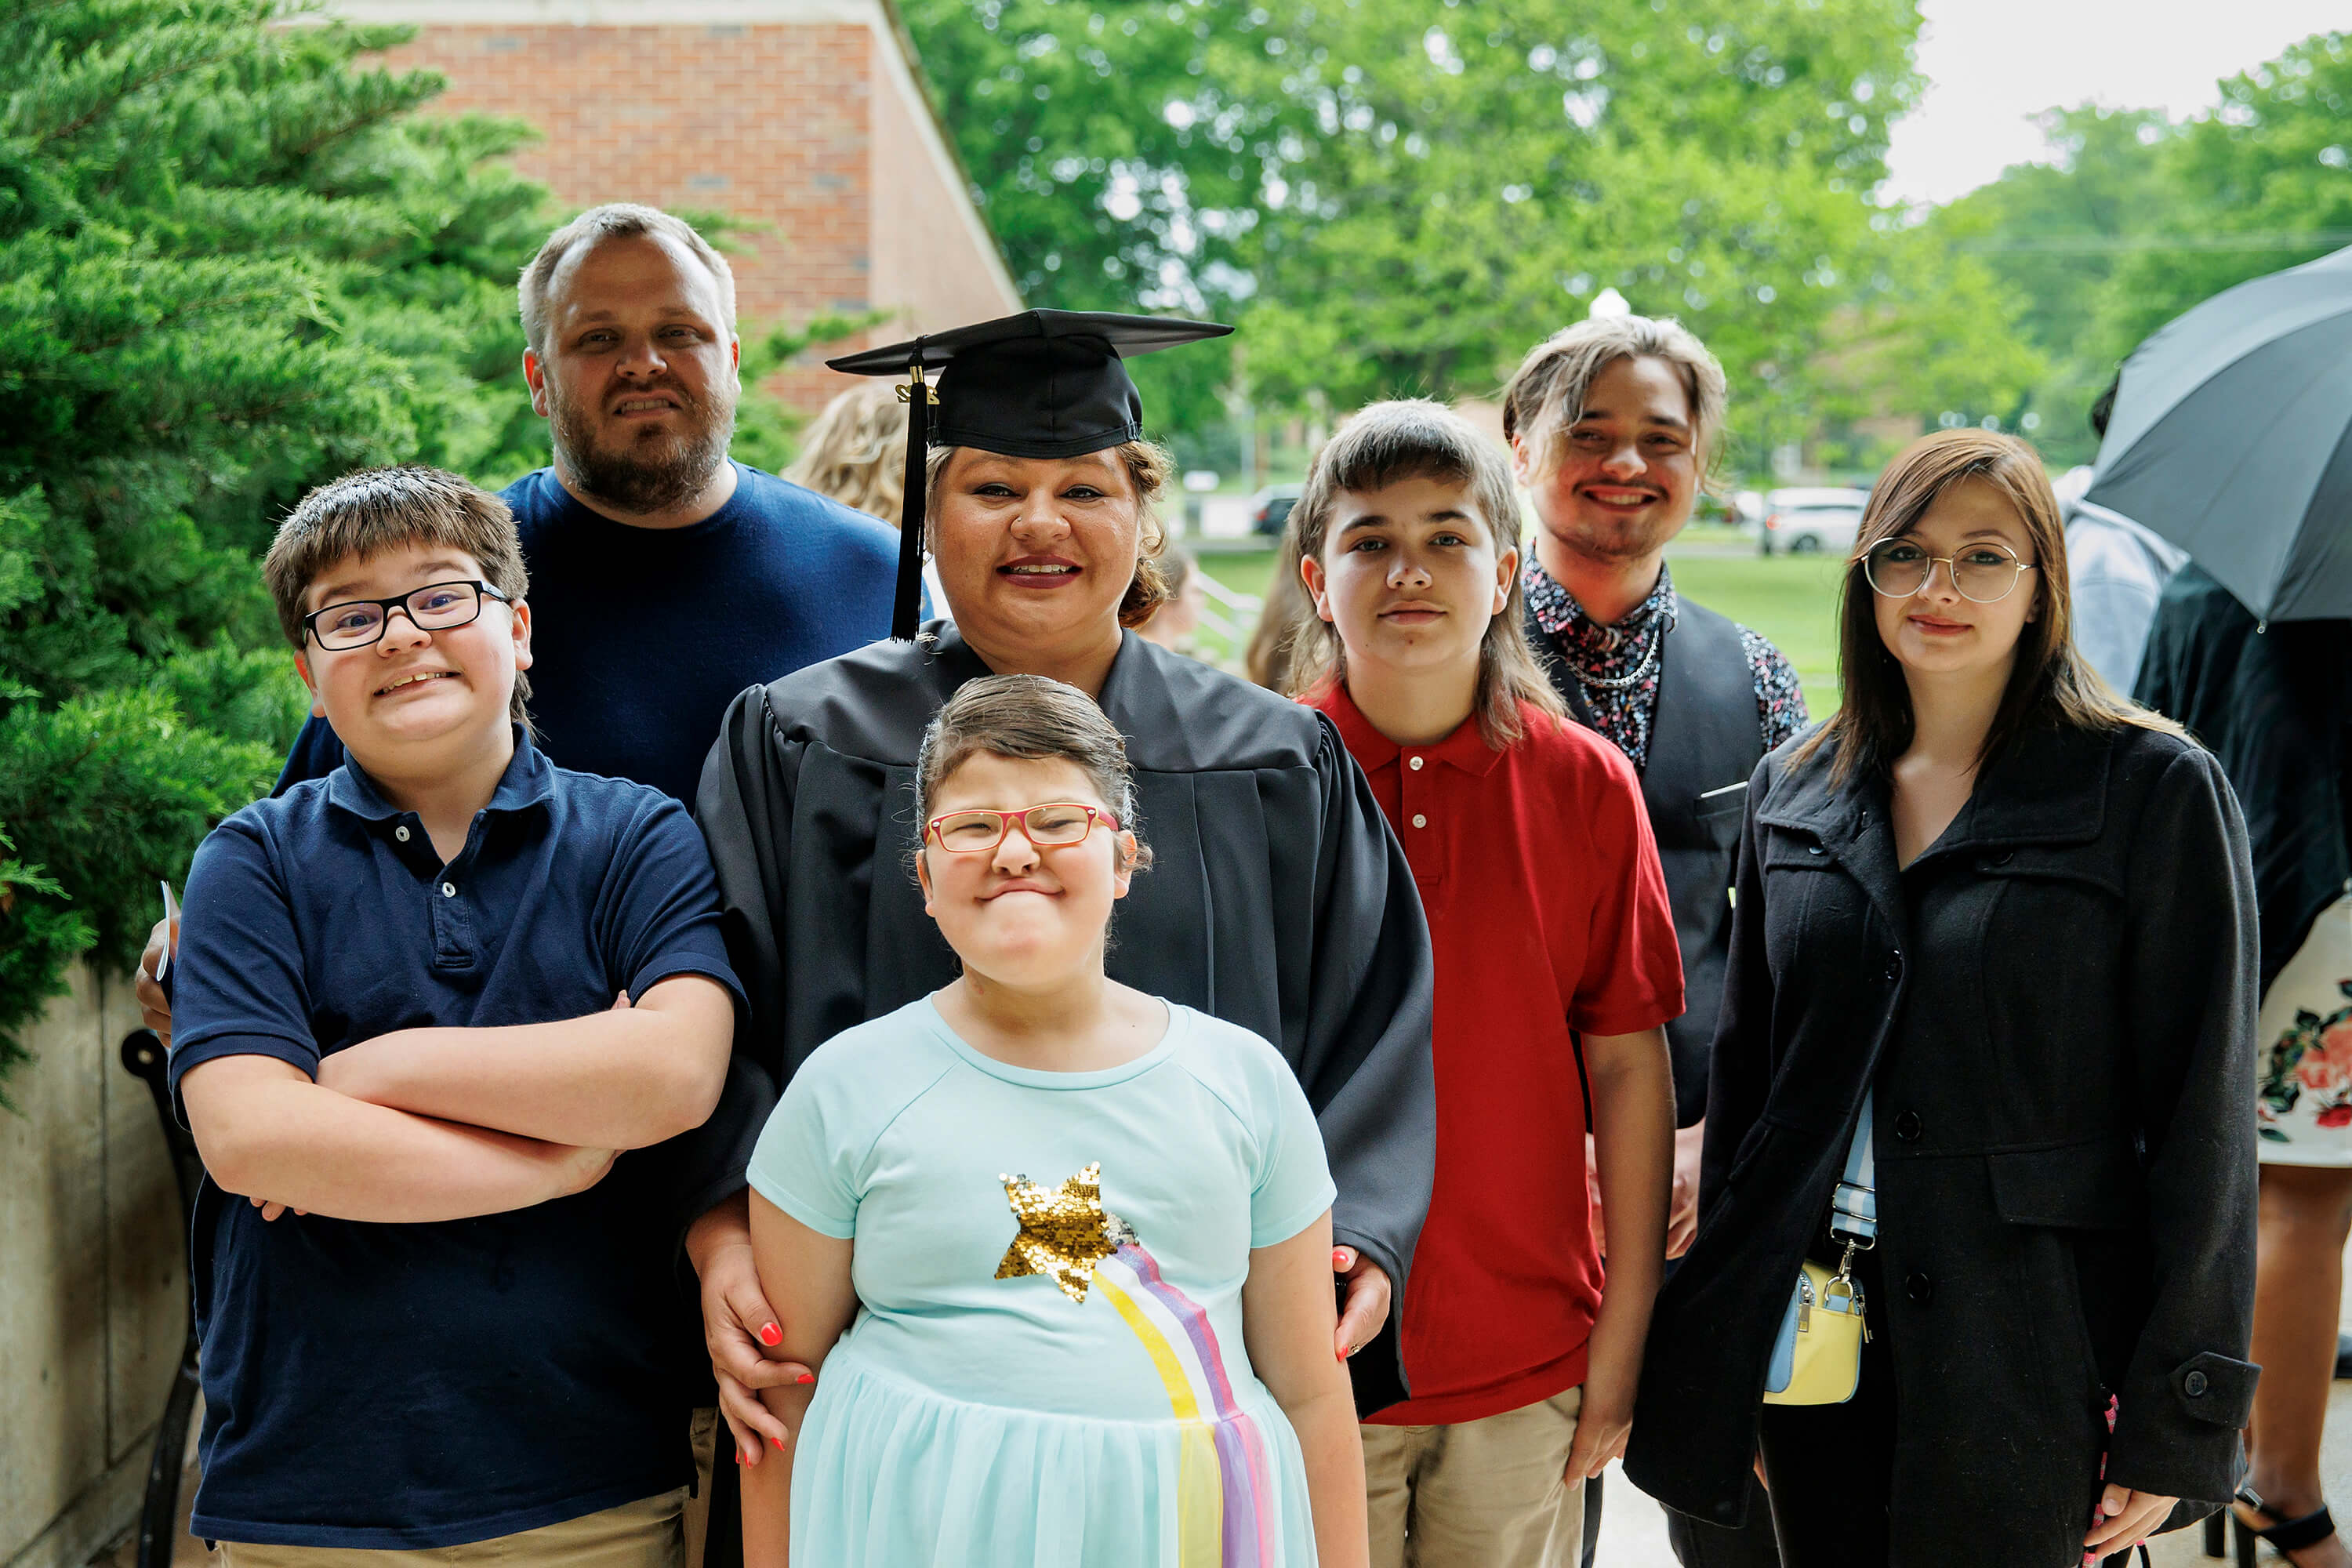 Celebrating her achievement were (back row) husband, Barry, and son Kayden Neal; (front row l, r) son Elijah Neal, Jennings, son Kyren, daughter-in-law, Lillianna Morgan; and (front) daughter, Adyson.